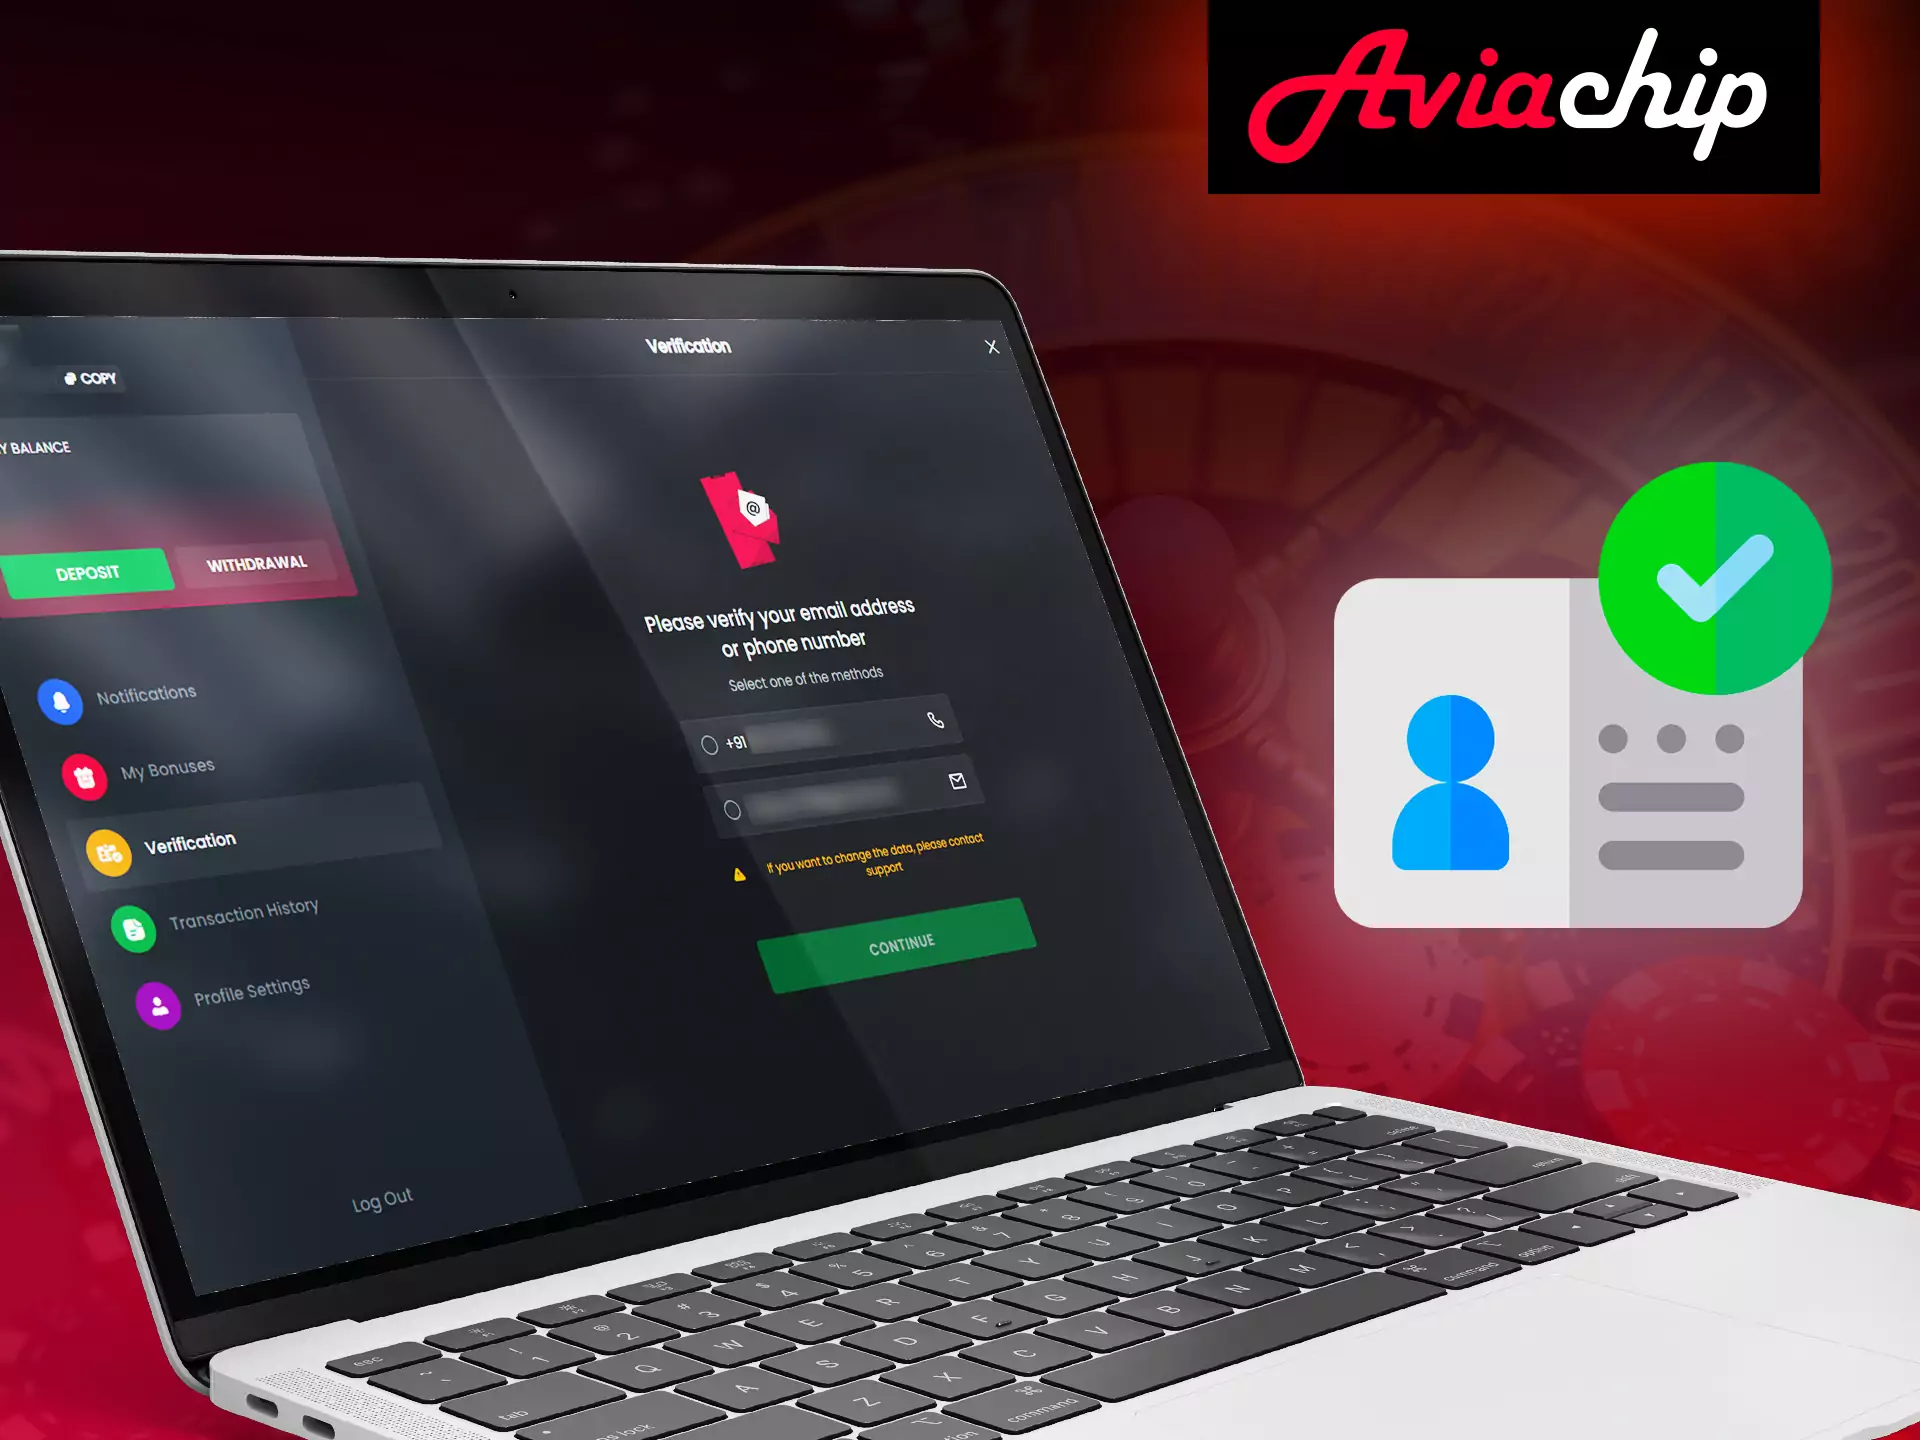 At Aviachip, you can do a simple identity verification.